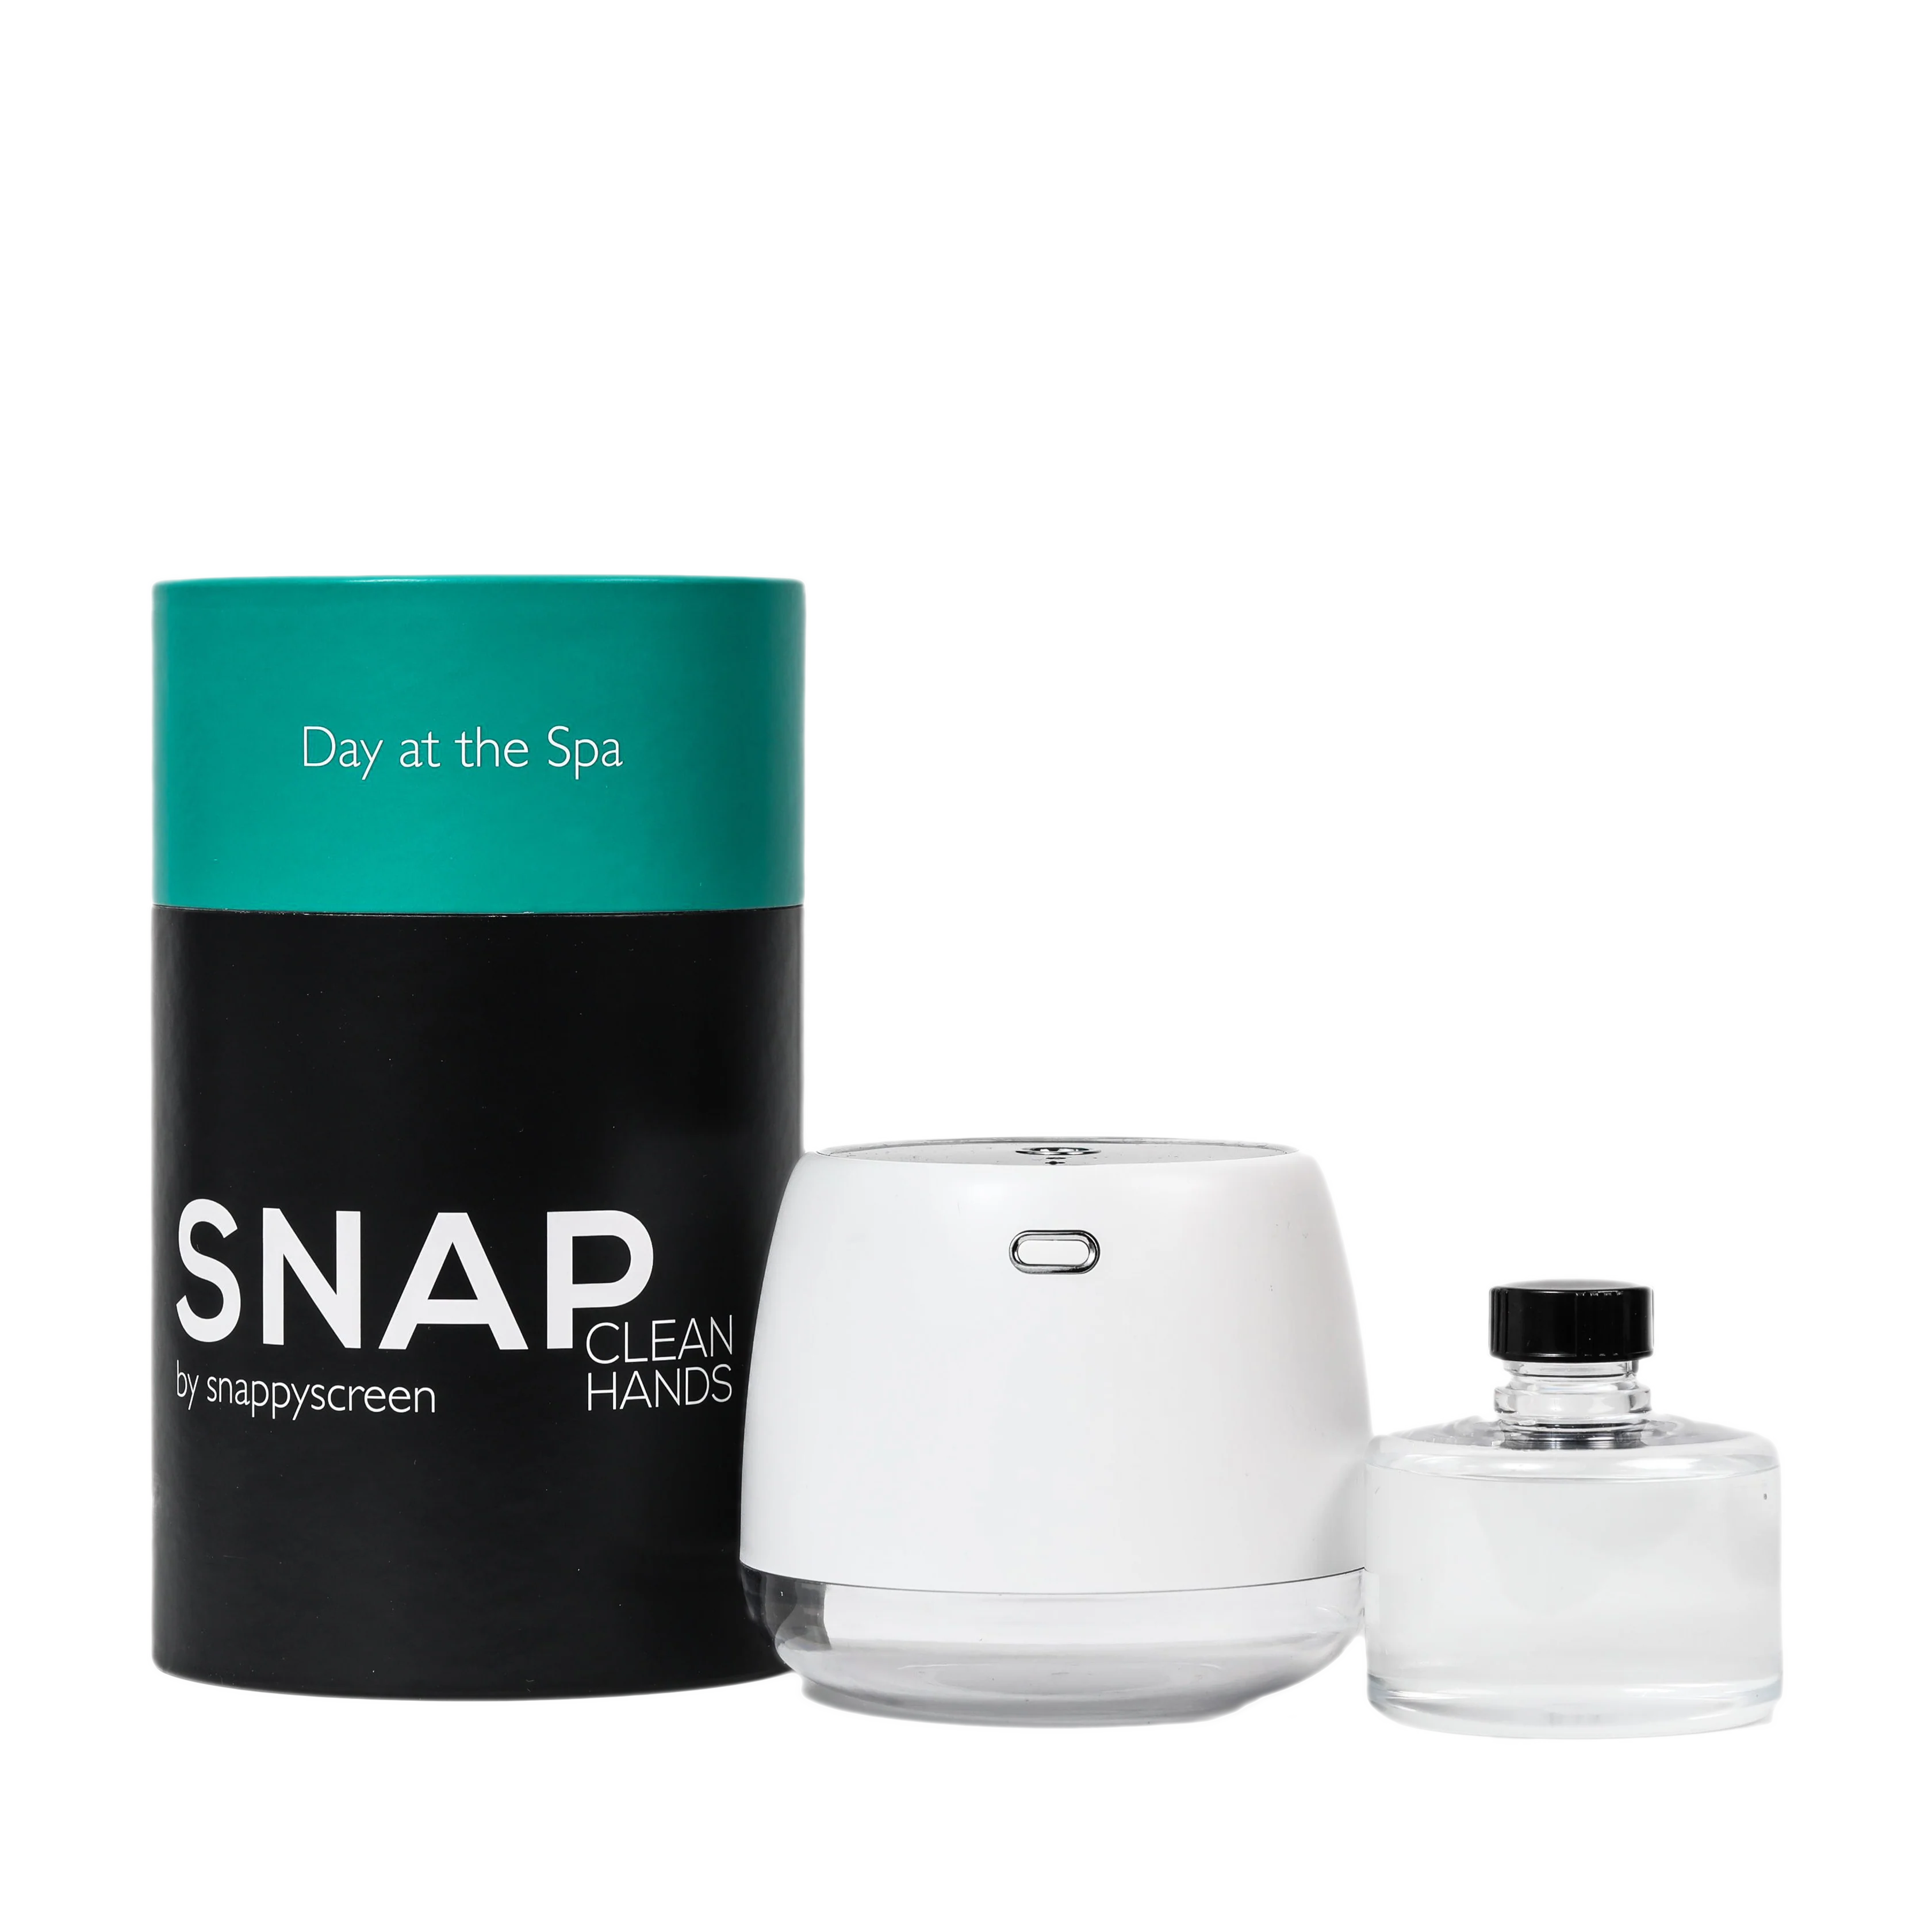 Snap Touchless Mist Sanitizer Device- Day At The Spa